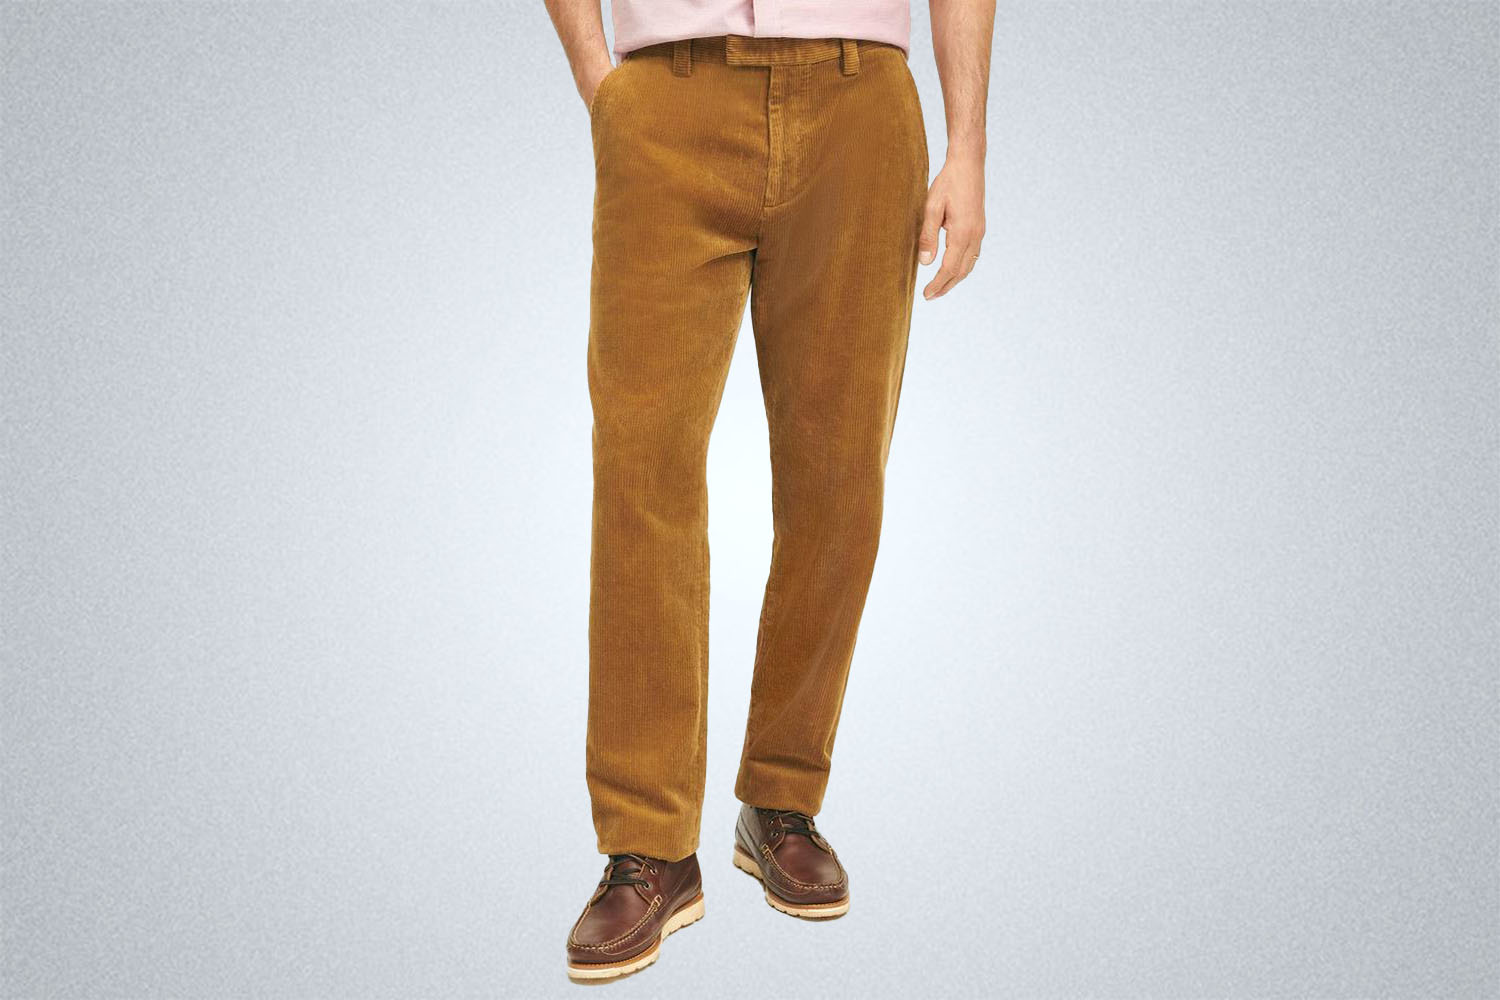 Brooks Brothers Regular Fit Cotton Wide Wale Corduroy Pants